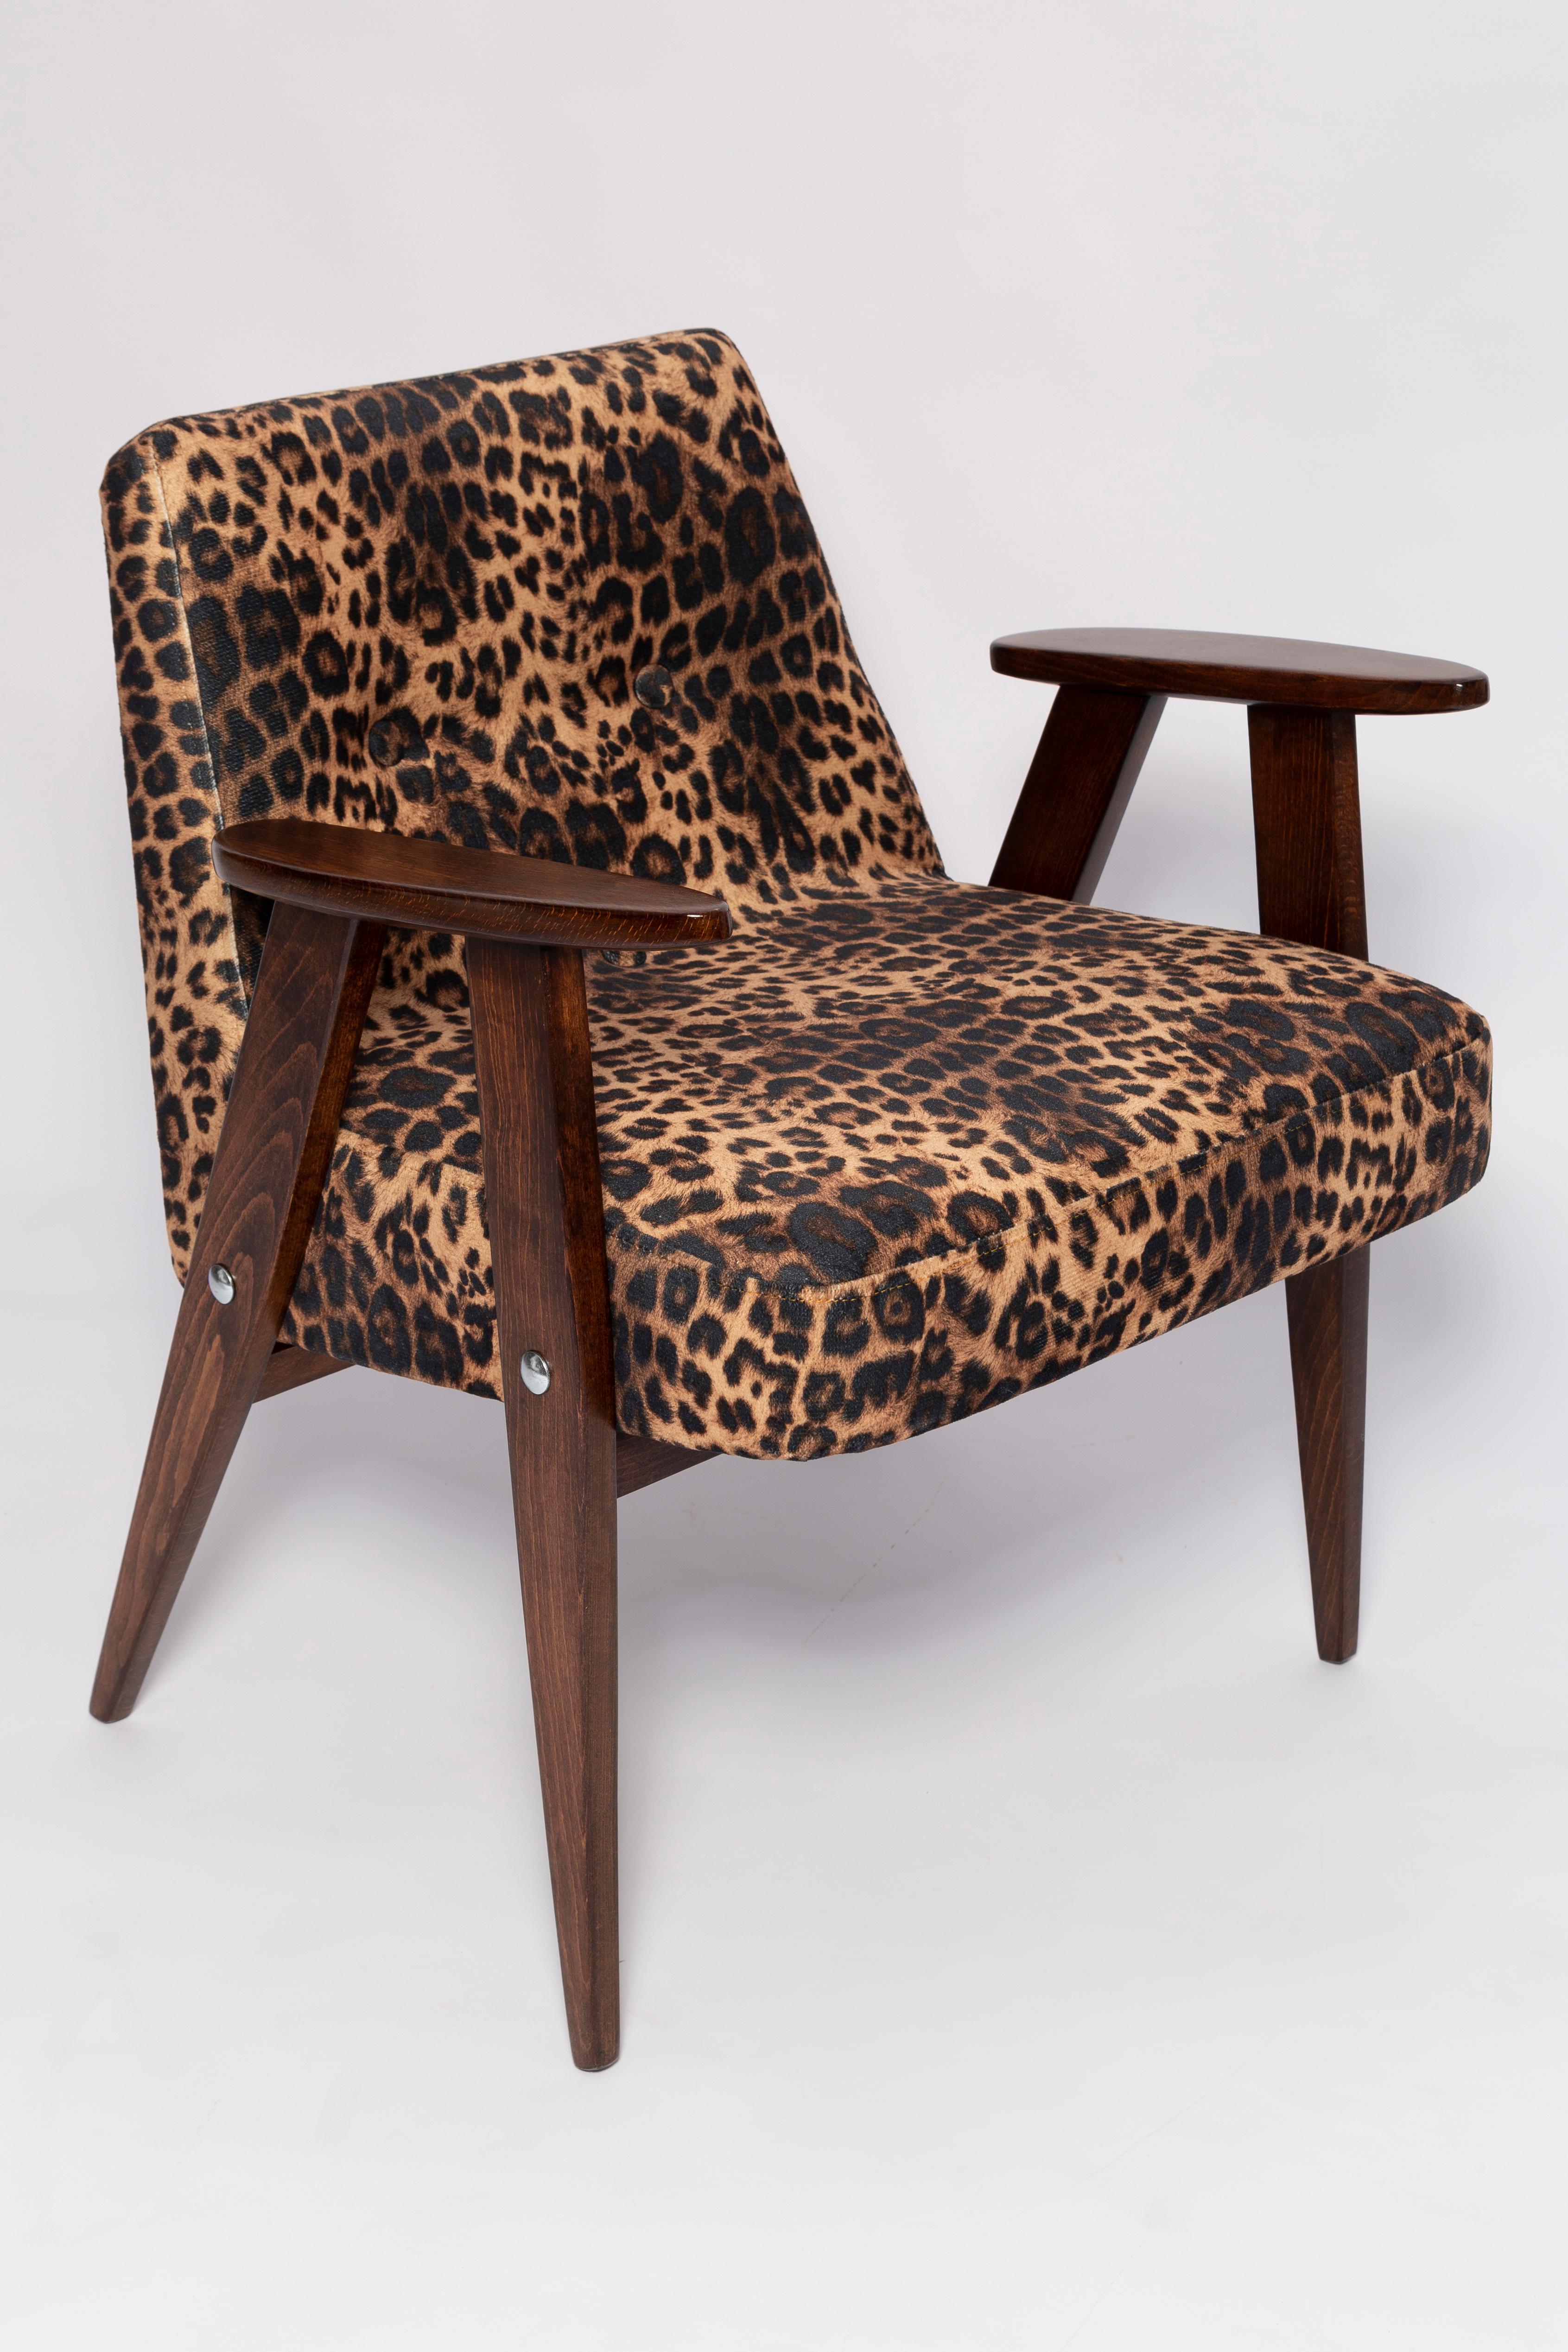 Hand-Crafted Two Midcentury 366 Armchairs in Leopard Print Velvet, Jozef Chierowski, 1960s For Sale